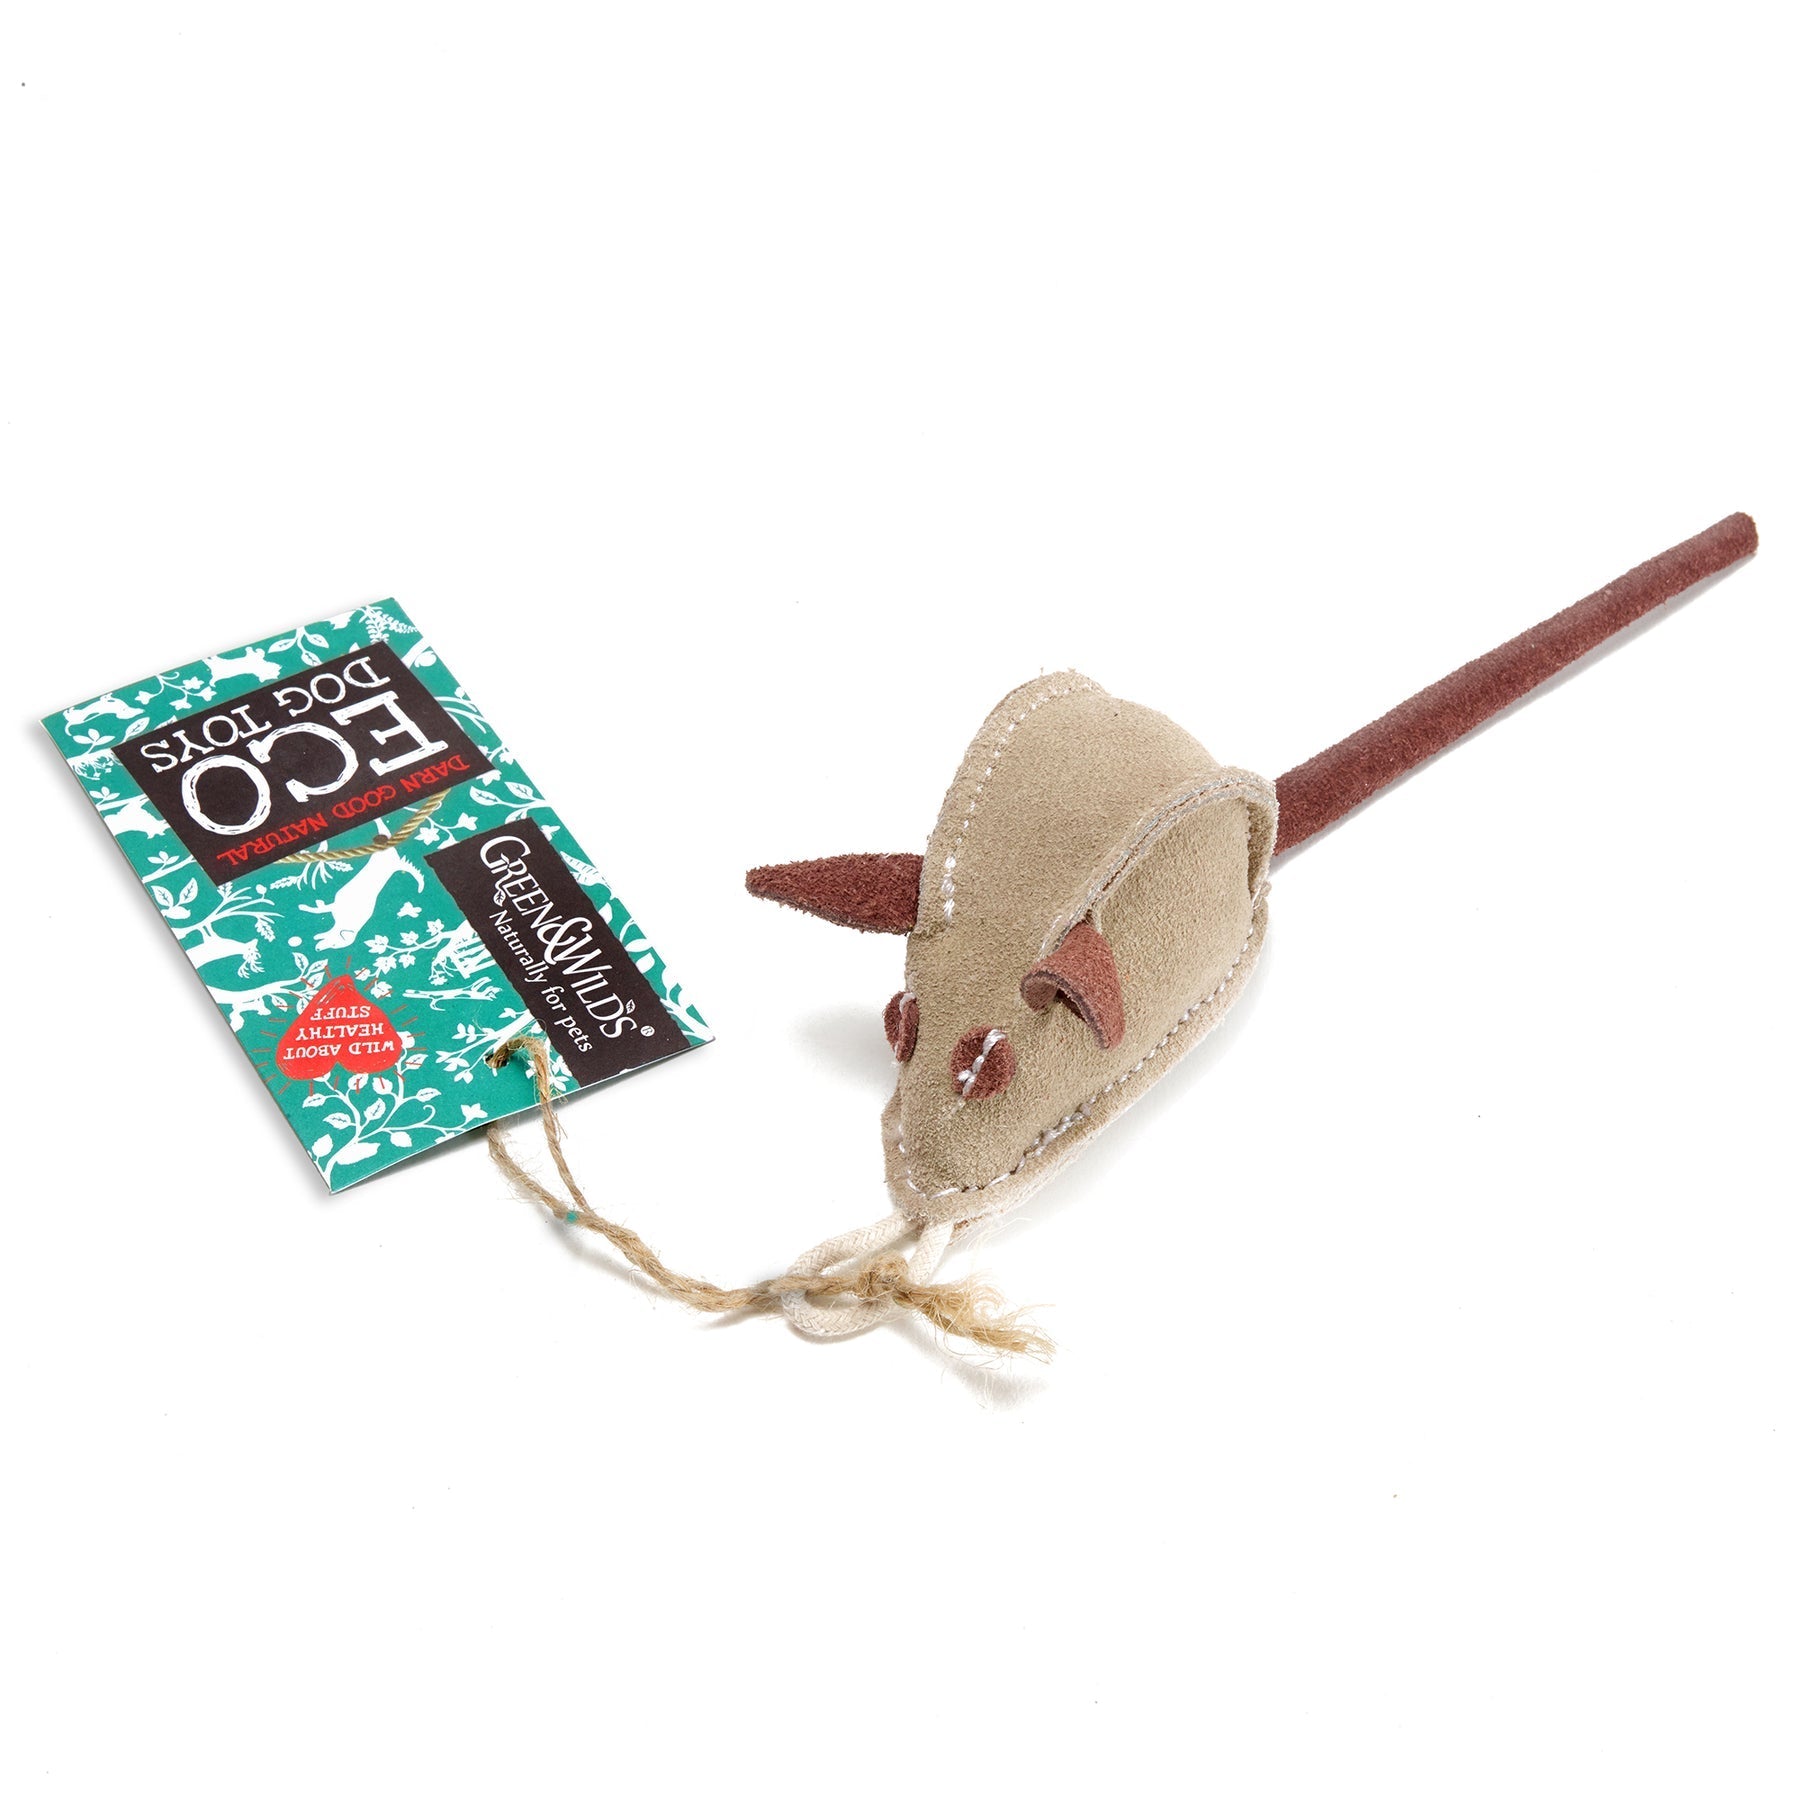 Mighty Mike the Mouse Natural Dog Toy